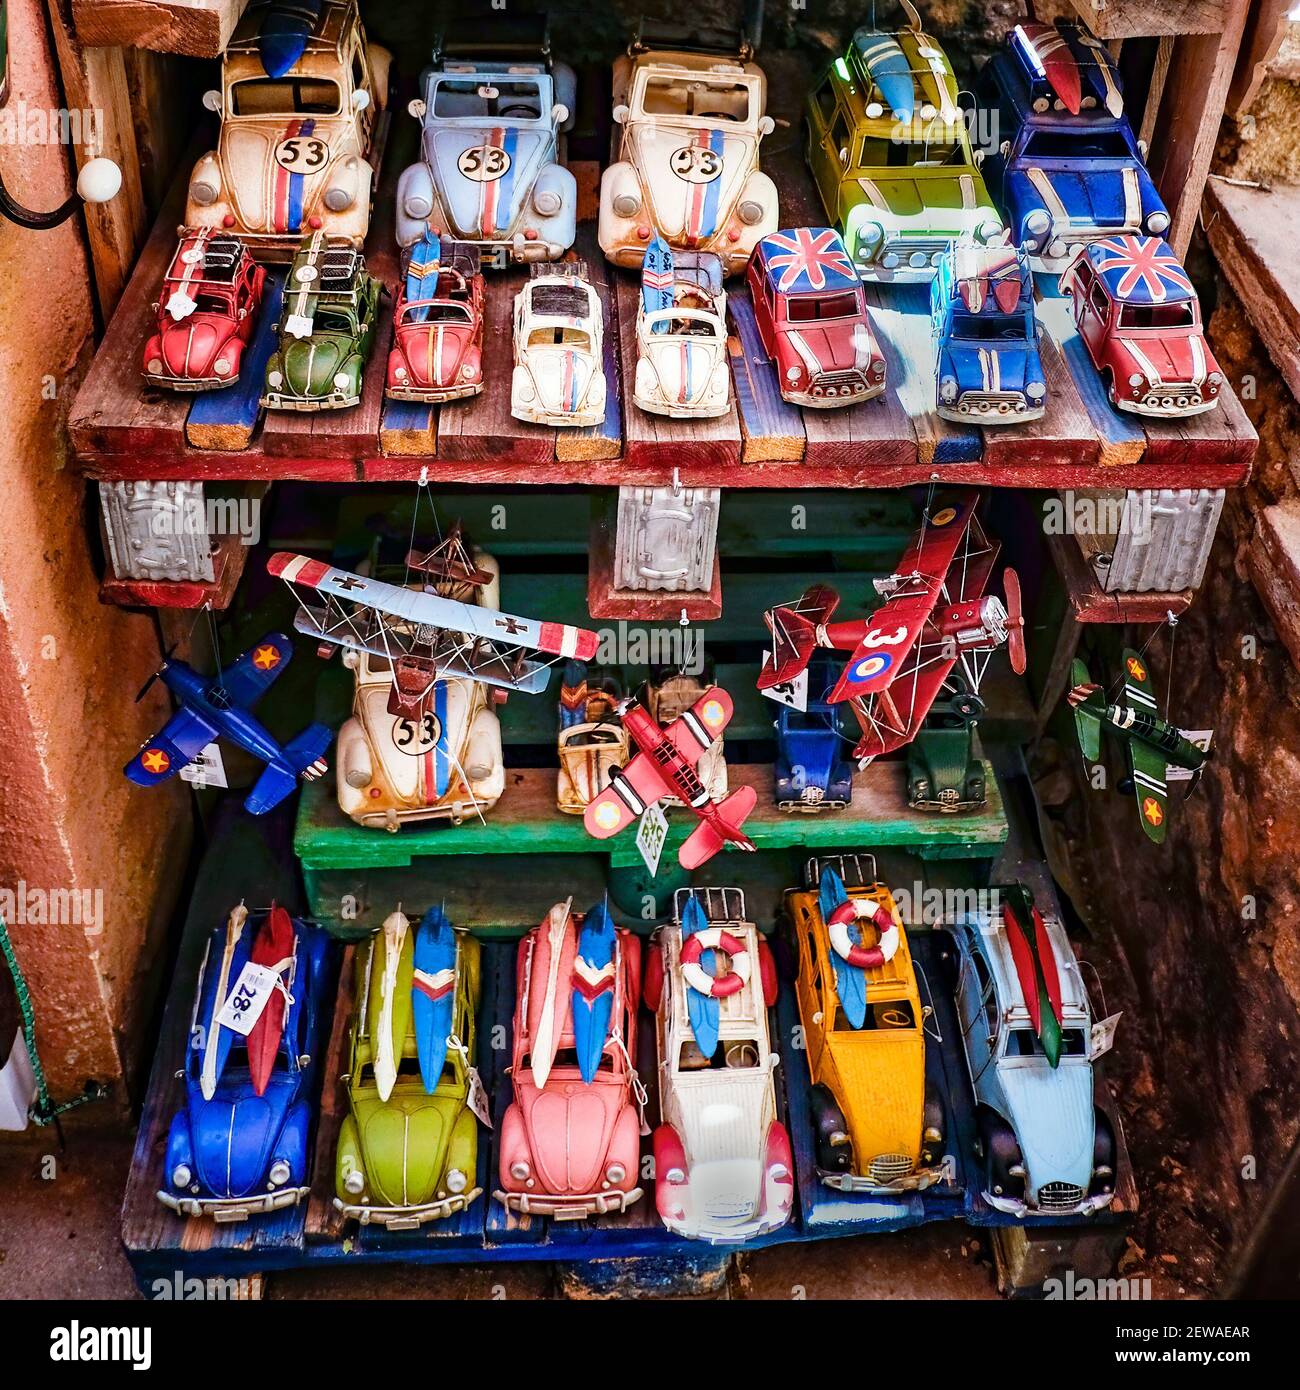 shelves of an artisan toy store with vintage classic cars with hippie aesthetics, English flags and surfboards, airplanes of the first world war, squa Stock Photo